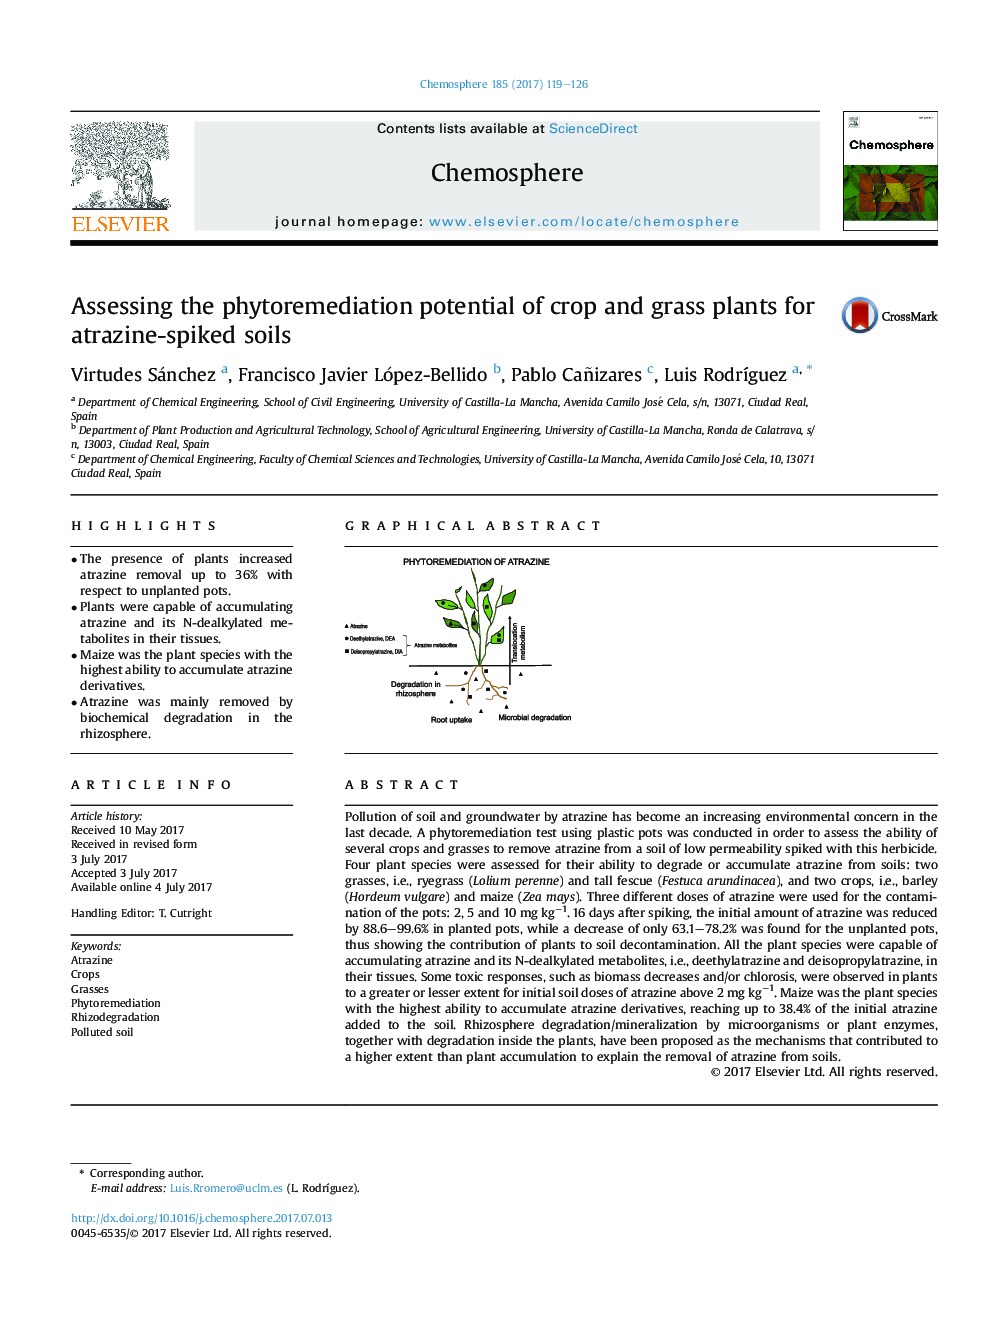 Assessing the phytoremediation potential of crop and grass plants for atrazine-spiked soils